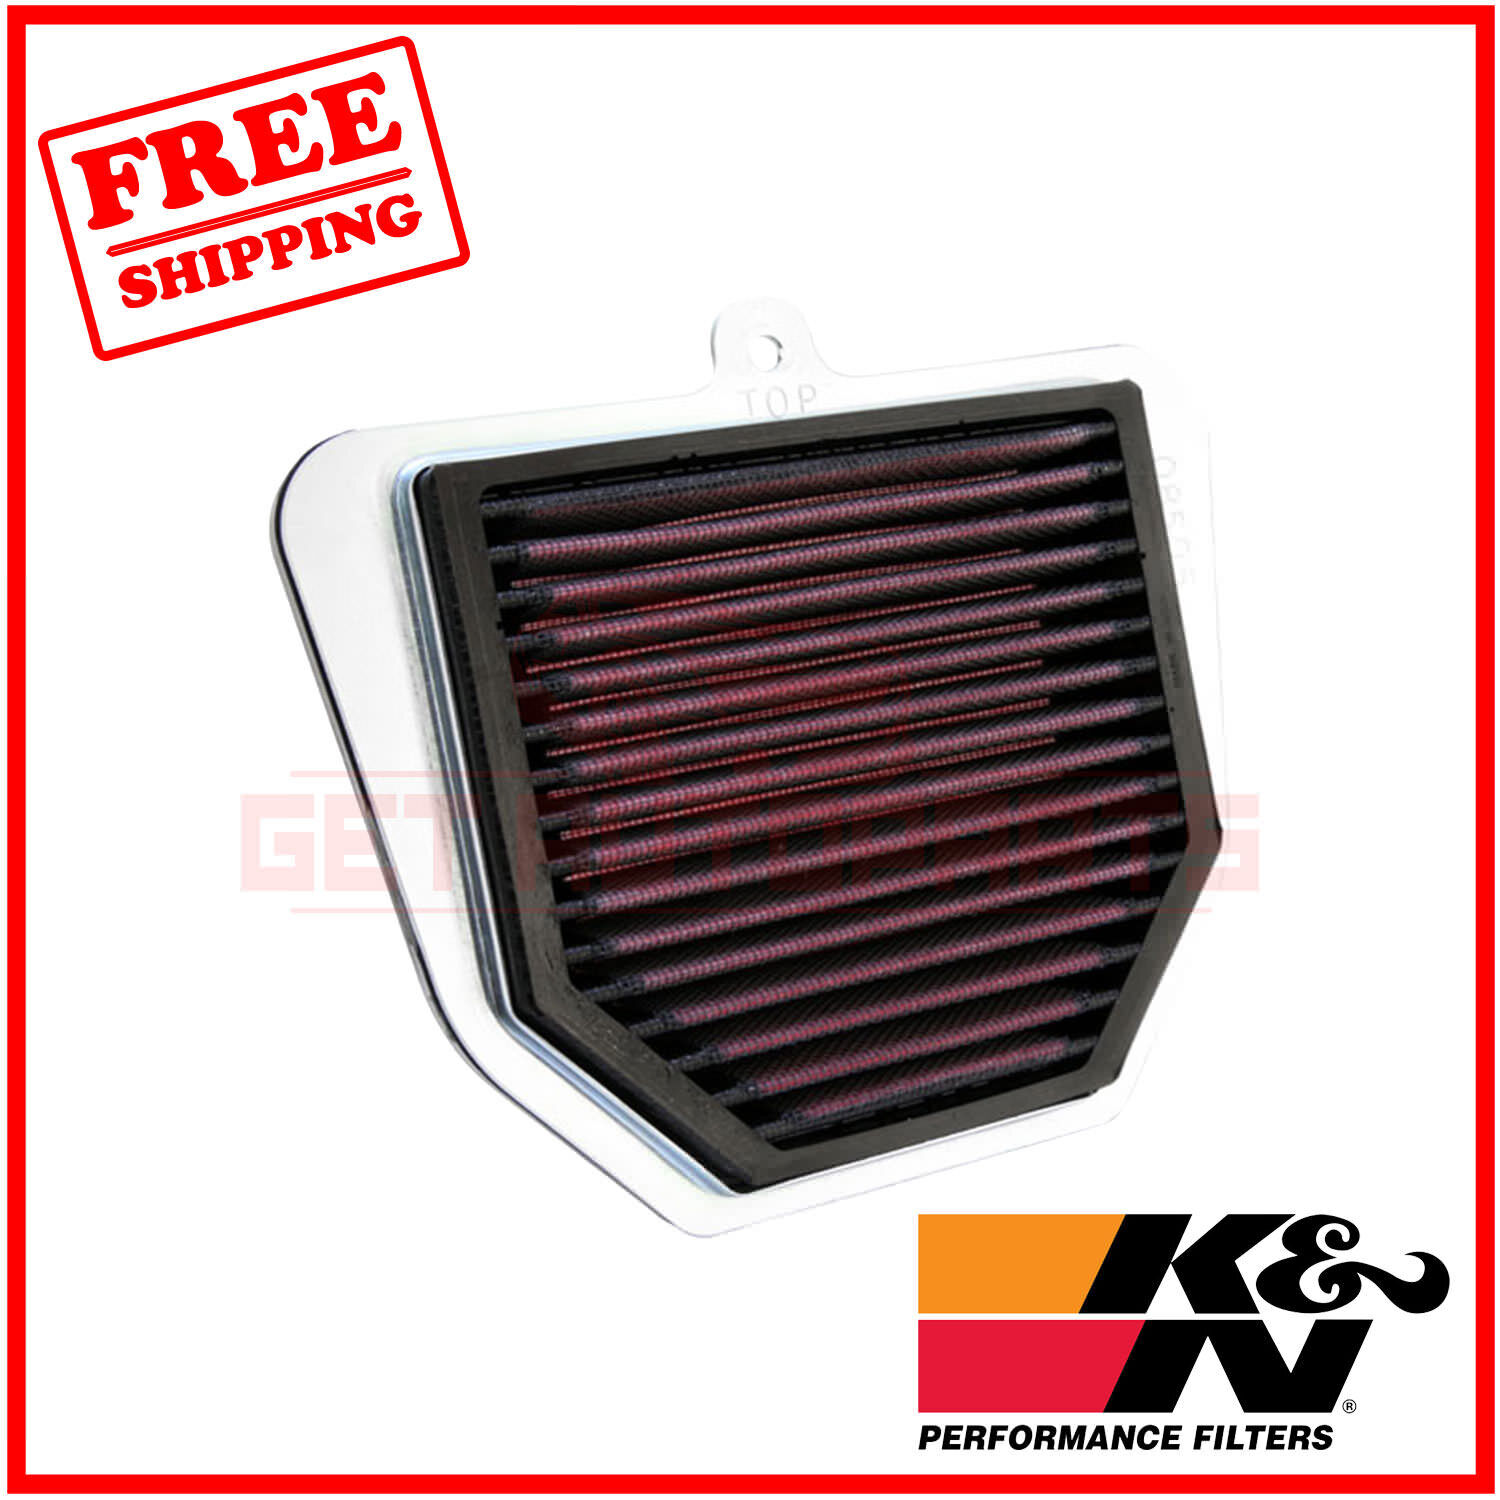 K&N Replacement Air Filter for Yamaha FZS1000 FZ1 2006-2015